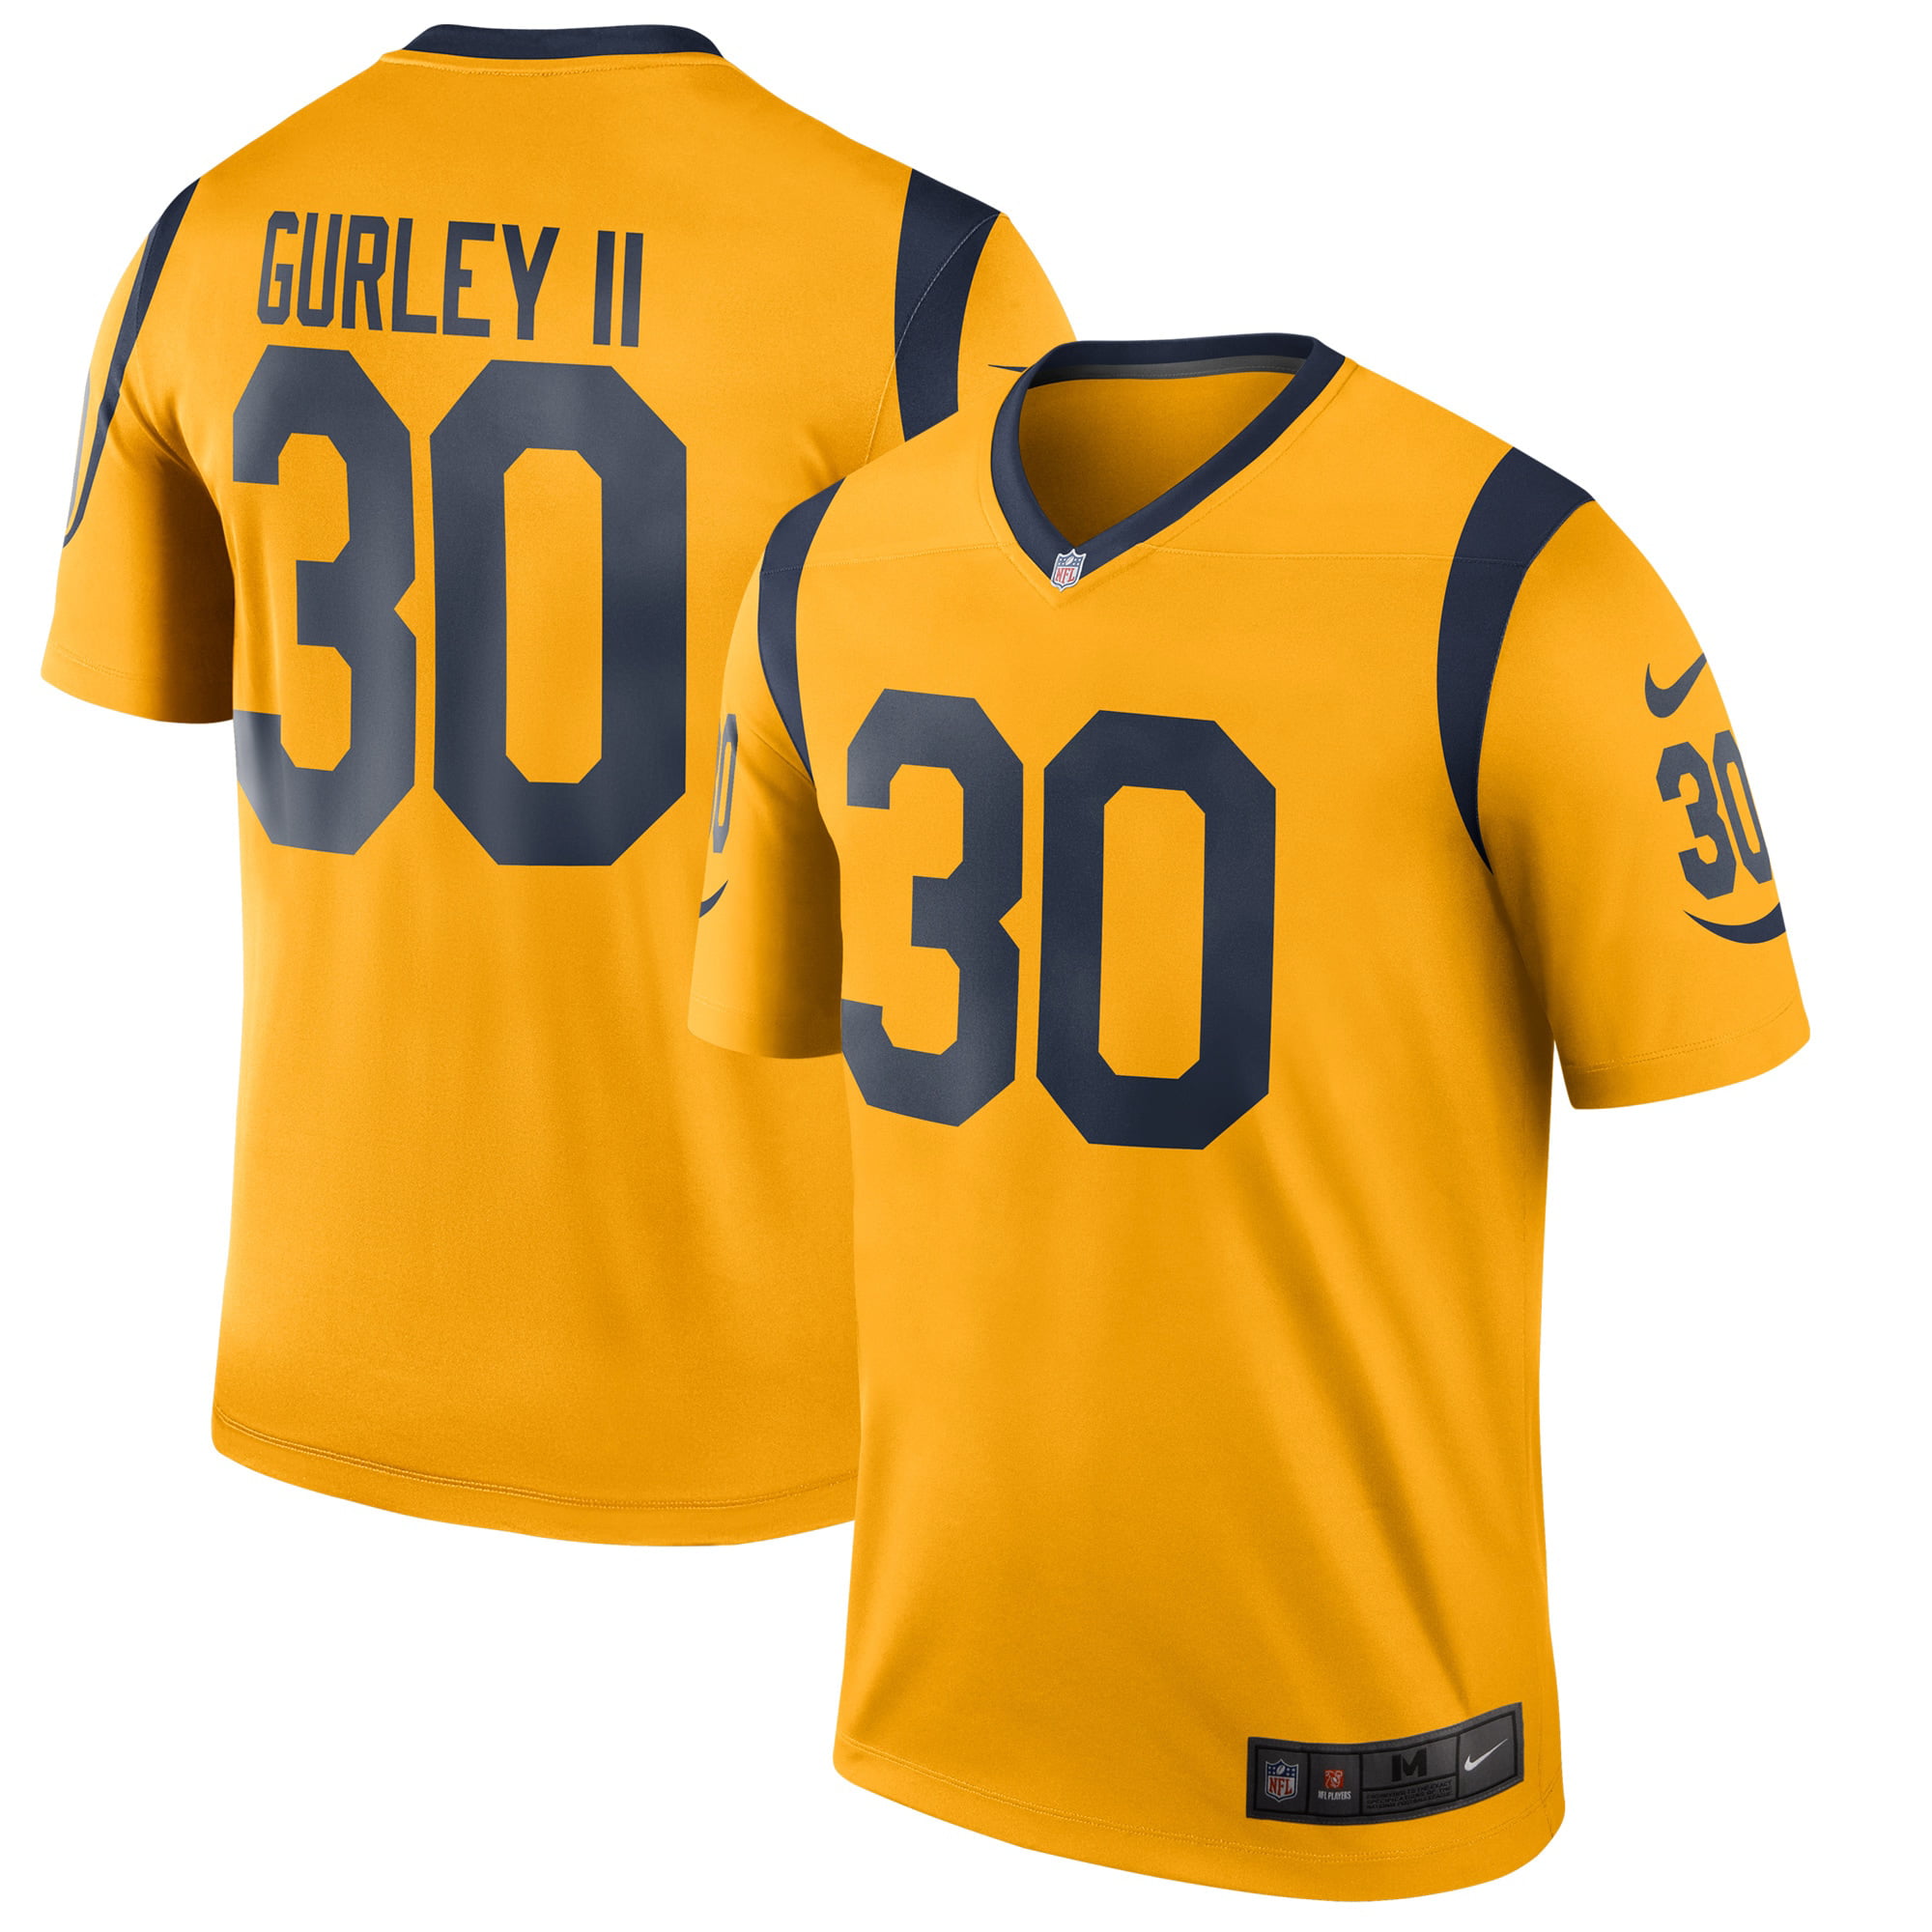 todd gurley jersey yellow